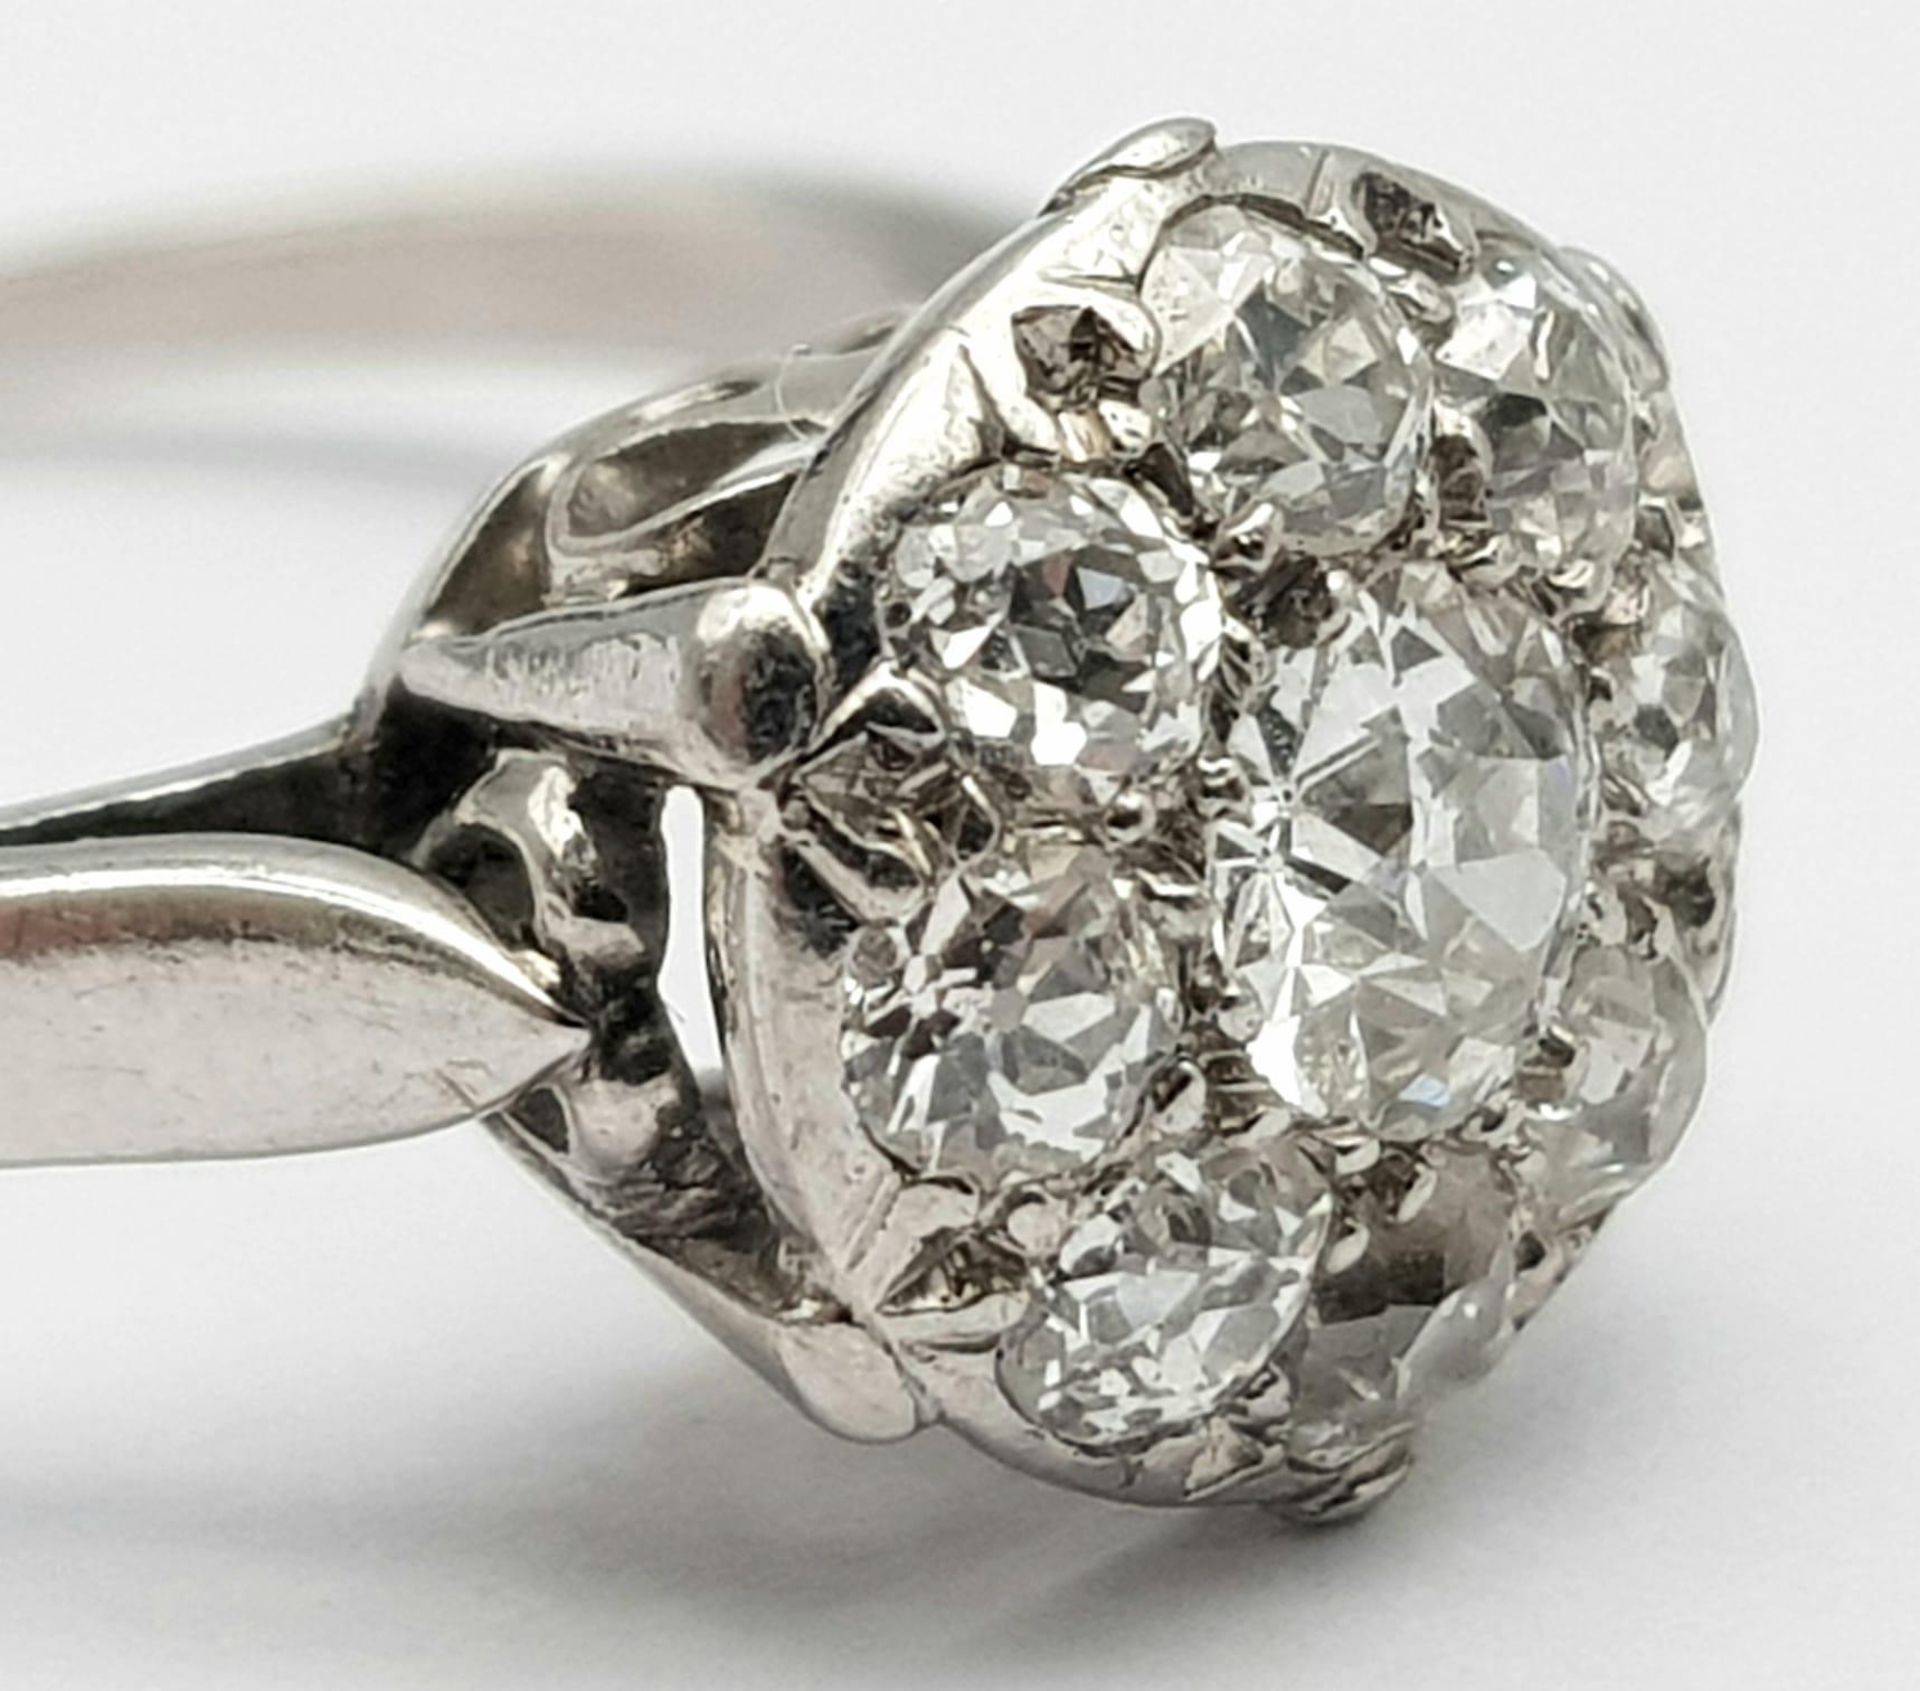 A LOVELY PLATINUM VINTAGE DIAMOND RING WITH APPROX 1.10CT OLD CUT DIAMONDS, WEIGHT 3.6G SIZE O - Image 4 of 9